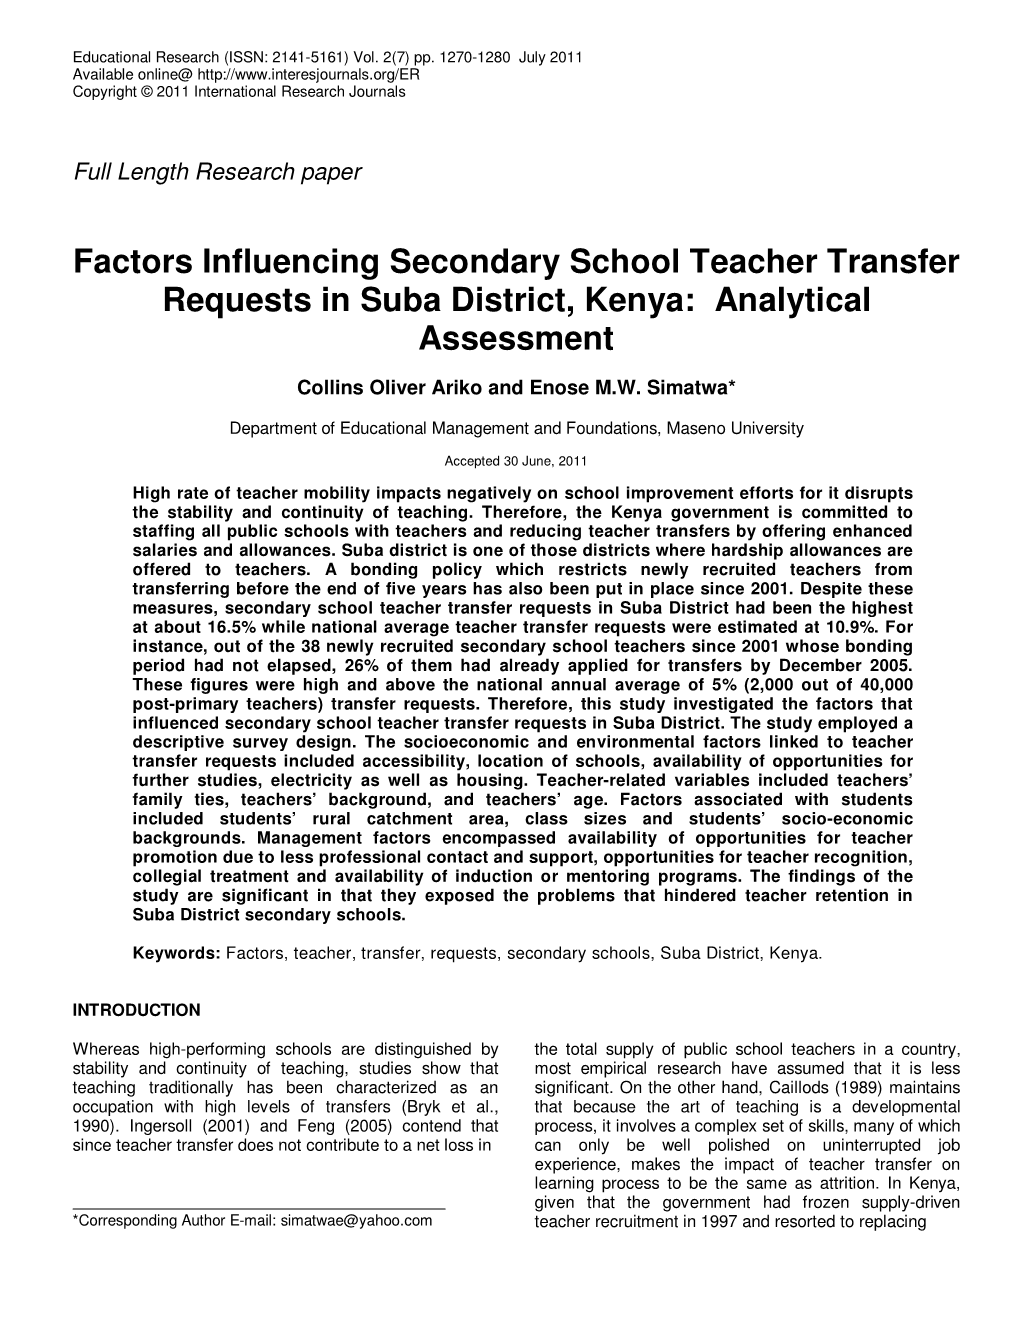 Factors Influencing Secondary School Teacher Transfer Requests in Suba District, Kenya: Analytical Assessment